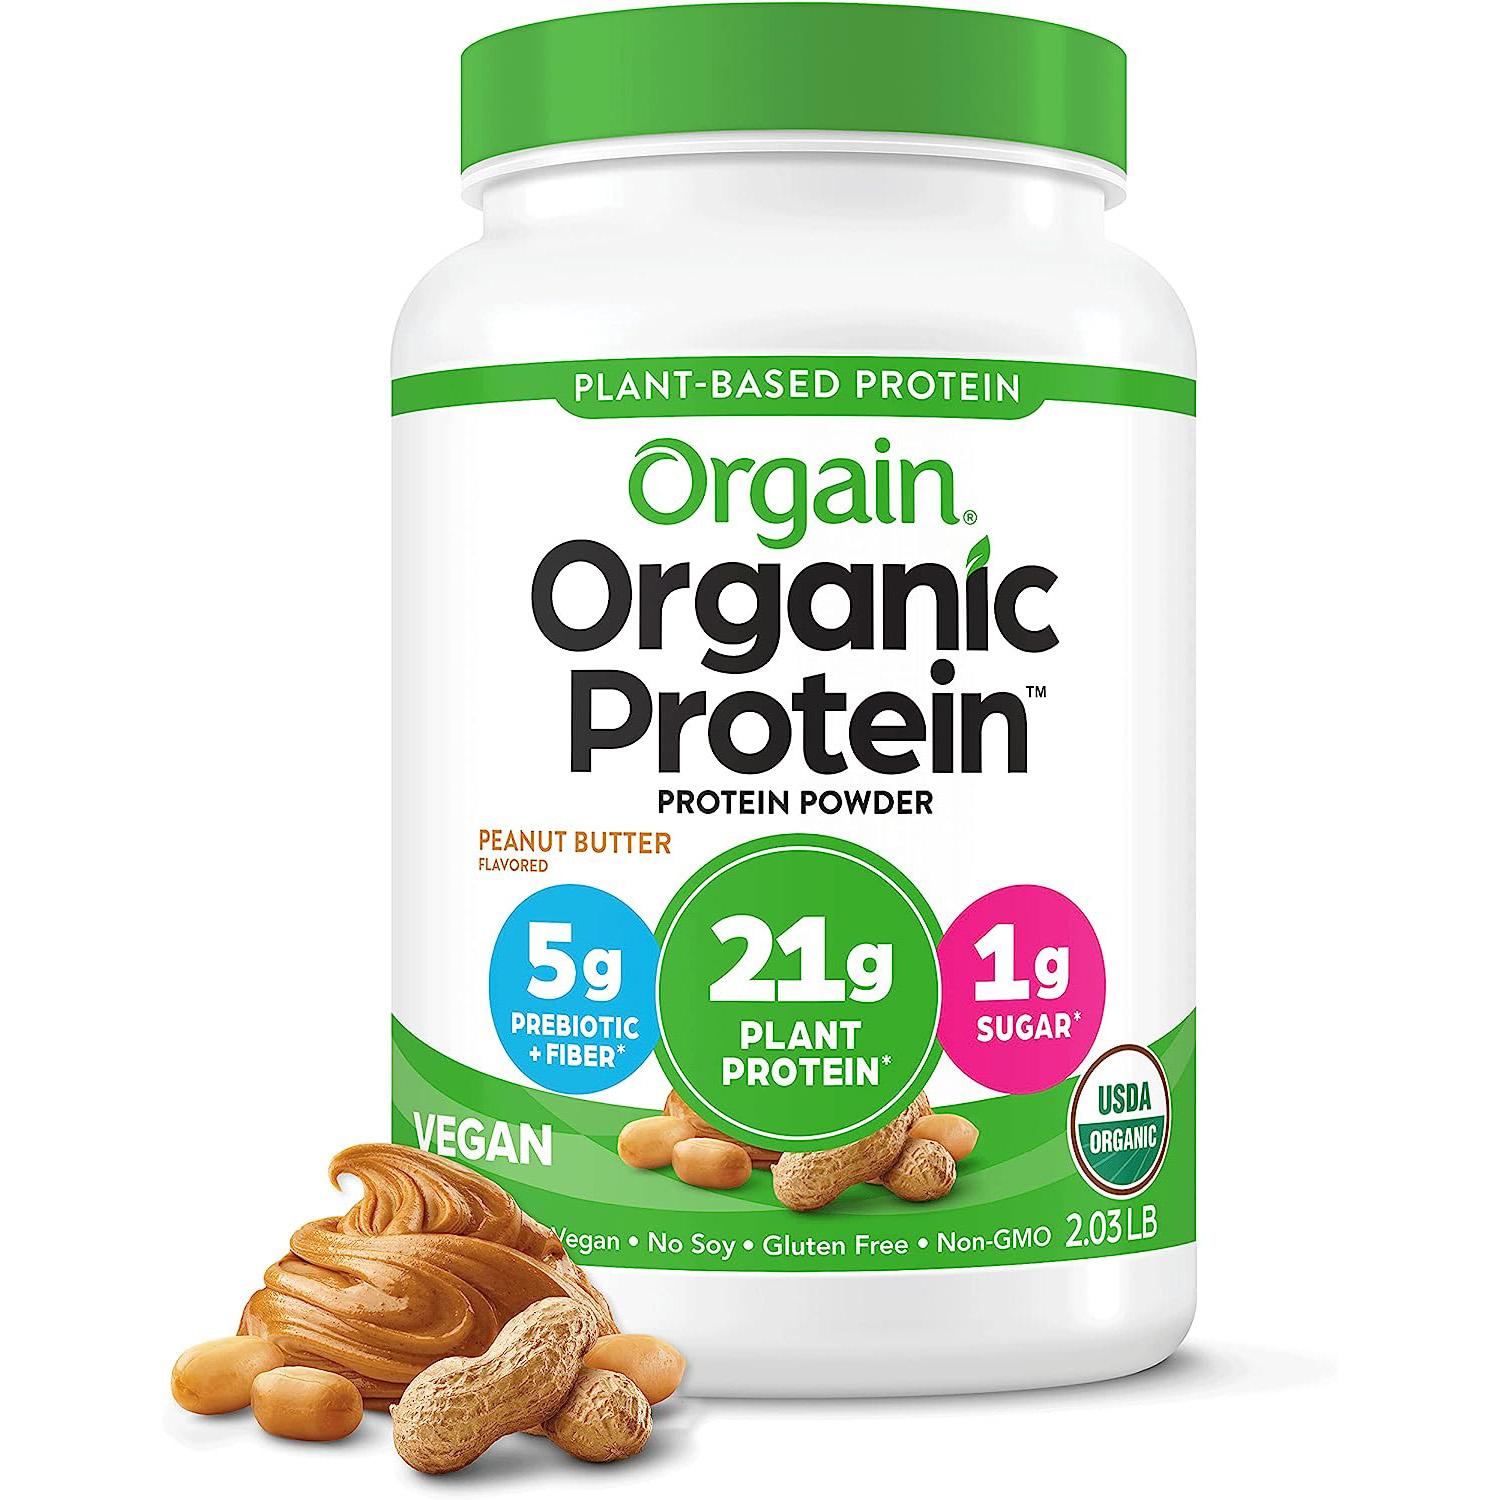 2lbs Orgain Organic Plant Based Protein Powder for $20.24 Shipped